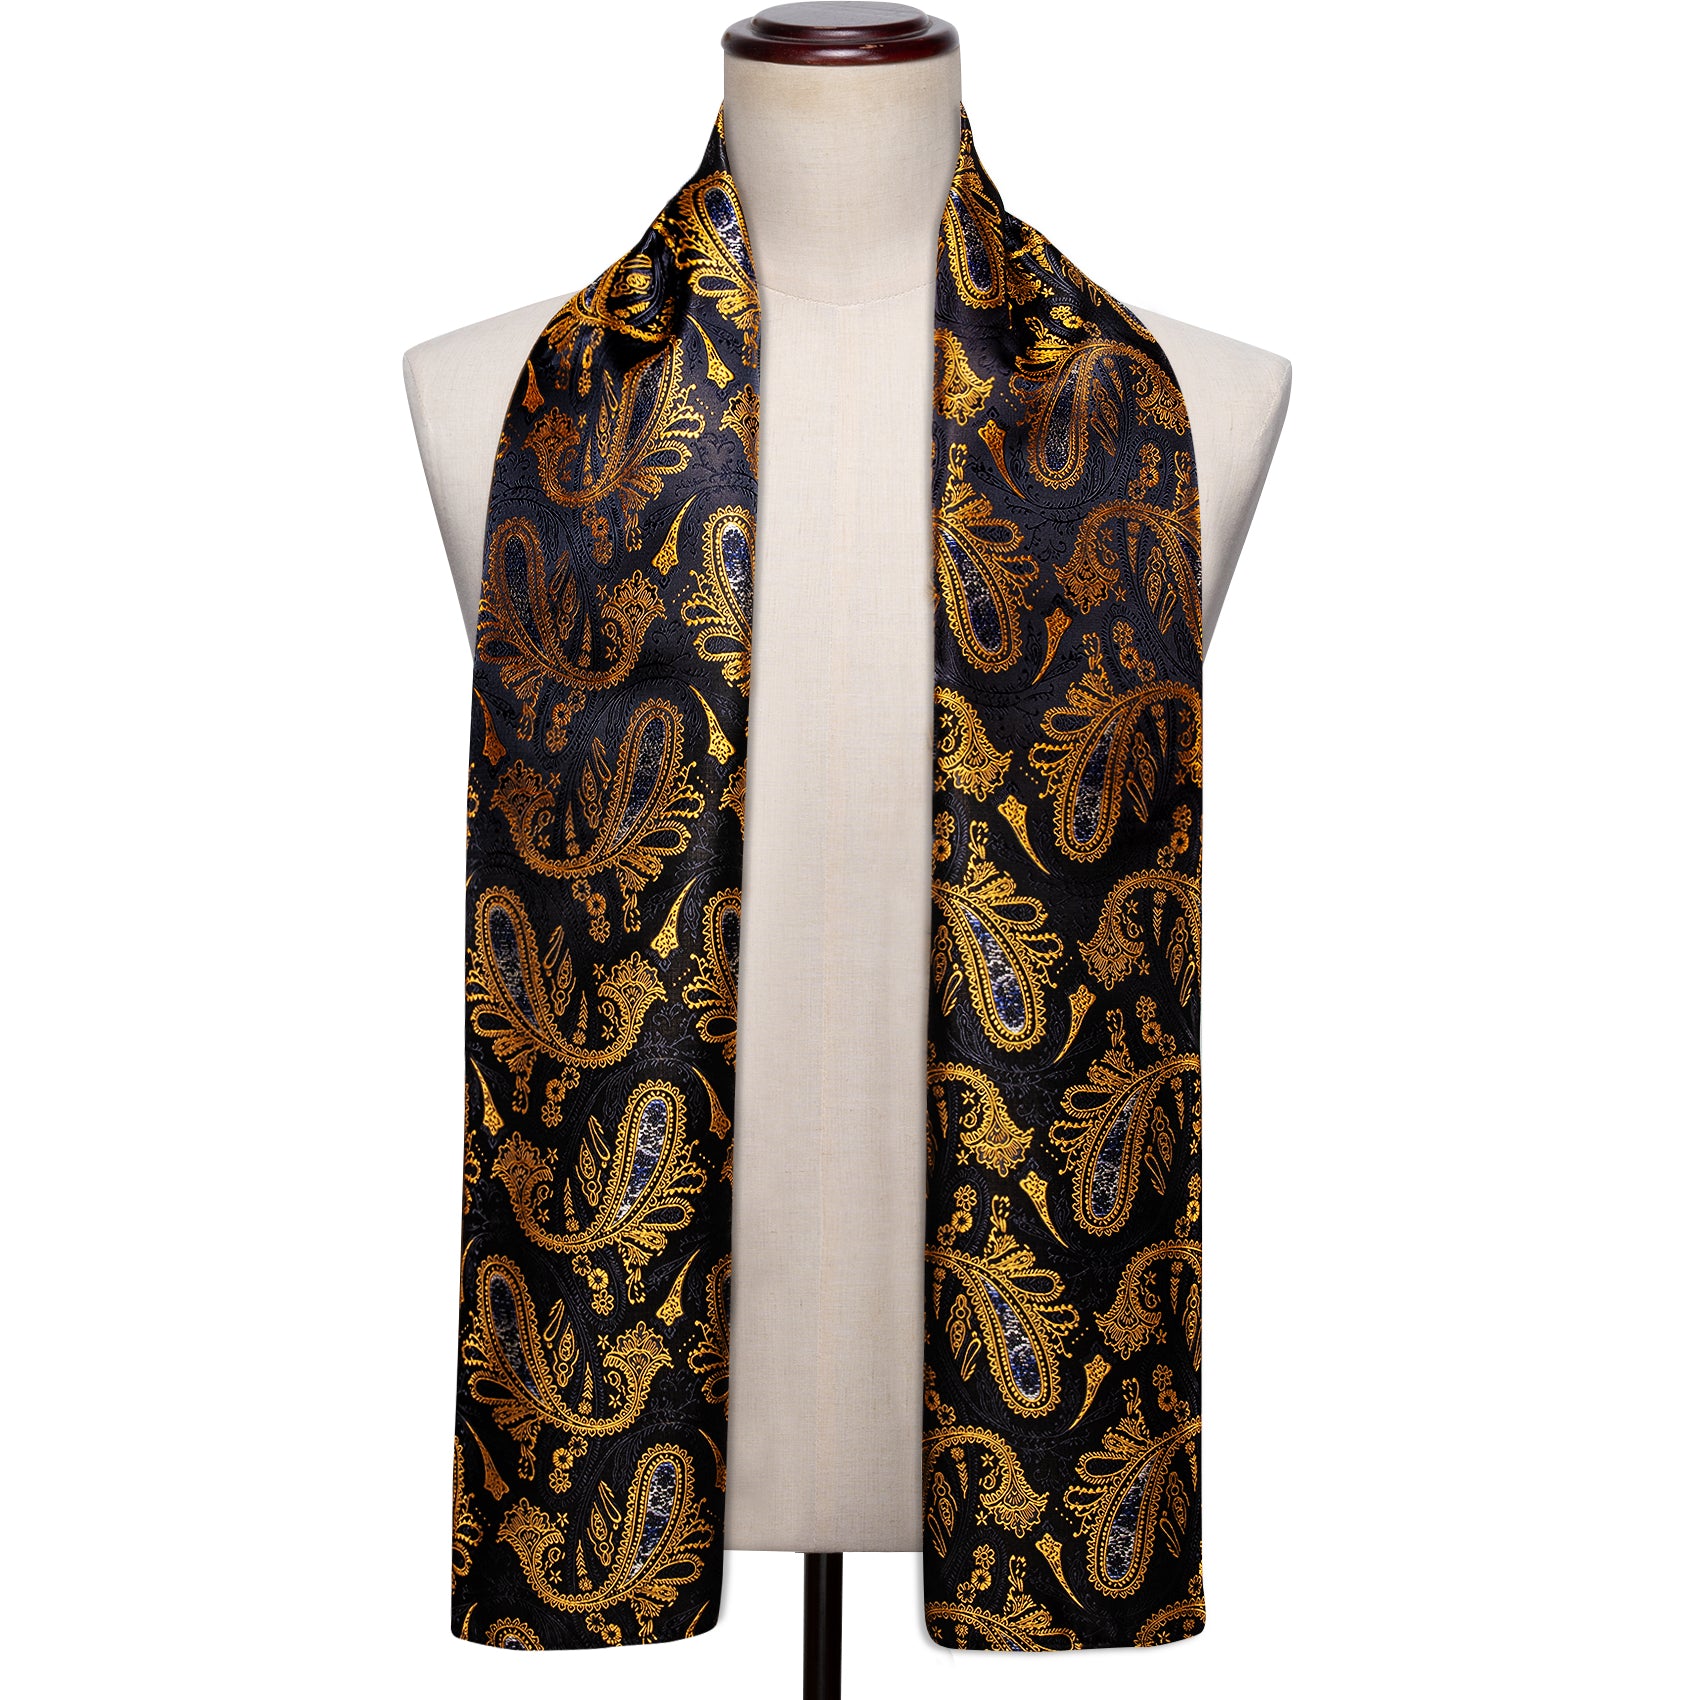 New Black Gold Paisley Scarf